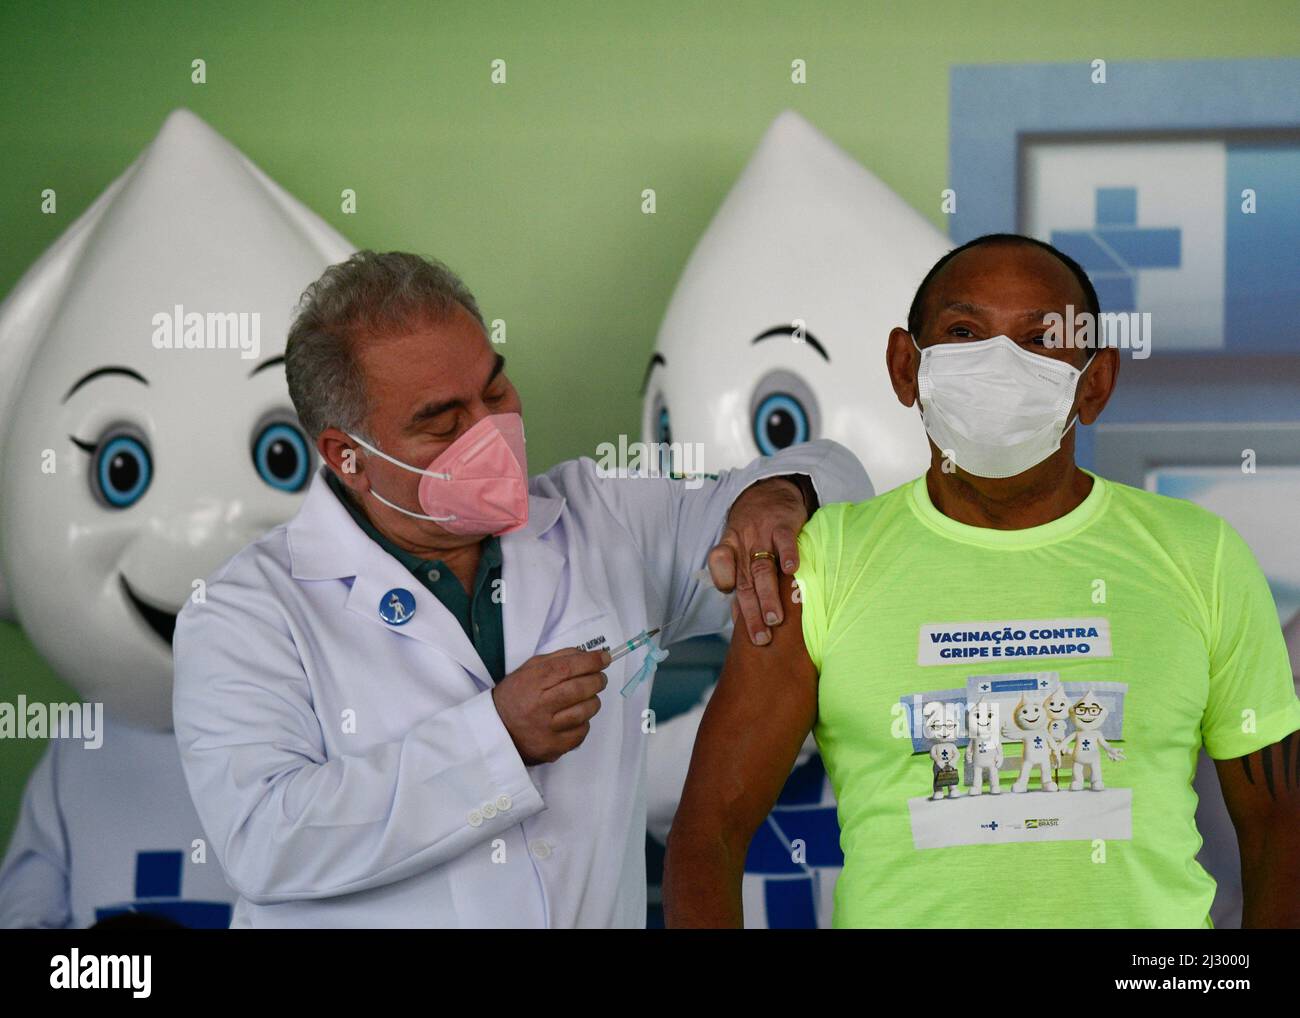 Brasilia, Brazil. 04th Apr, 2022. DF - Brasilia - 04/04/2022 - BRASILIA, LAUNCH OF THE NATIONAL VACCINATION CAMPAIGN - The Minister of Health, Marcelo Queiroga, vaccinates a man during the launch of the National Vaccination Campaign against Influenza and Measles, this Monday, April 4. Photo: Mateus Bonomi/AGIF Credit: AGIF/Alamy Live News Stock Photo